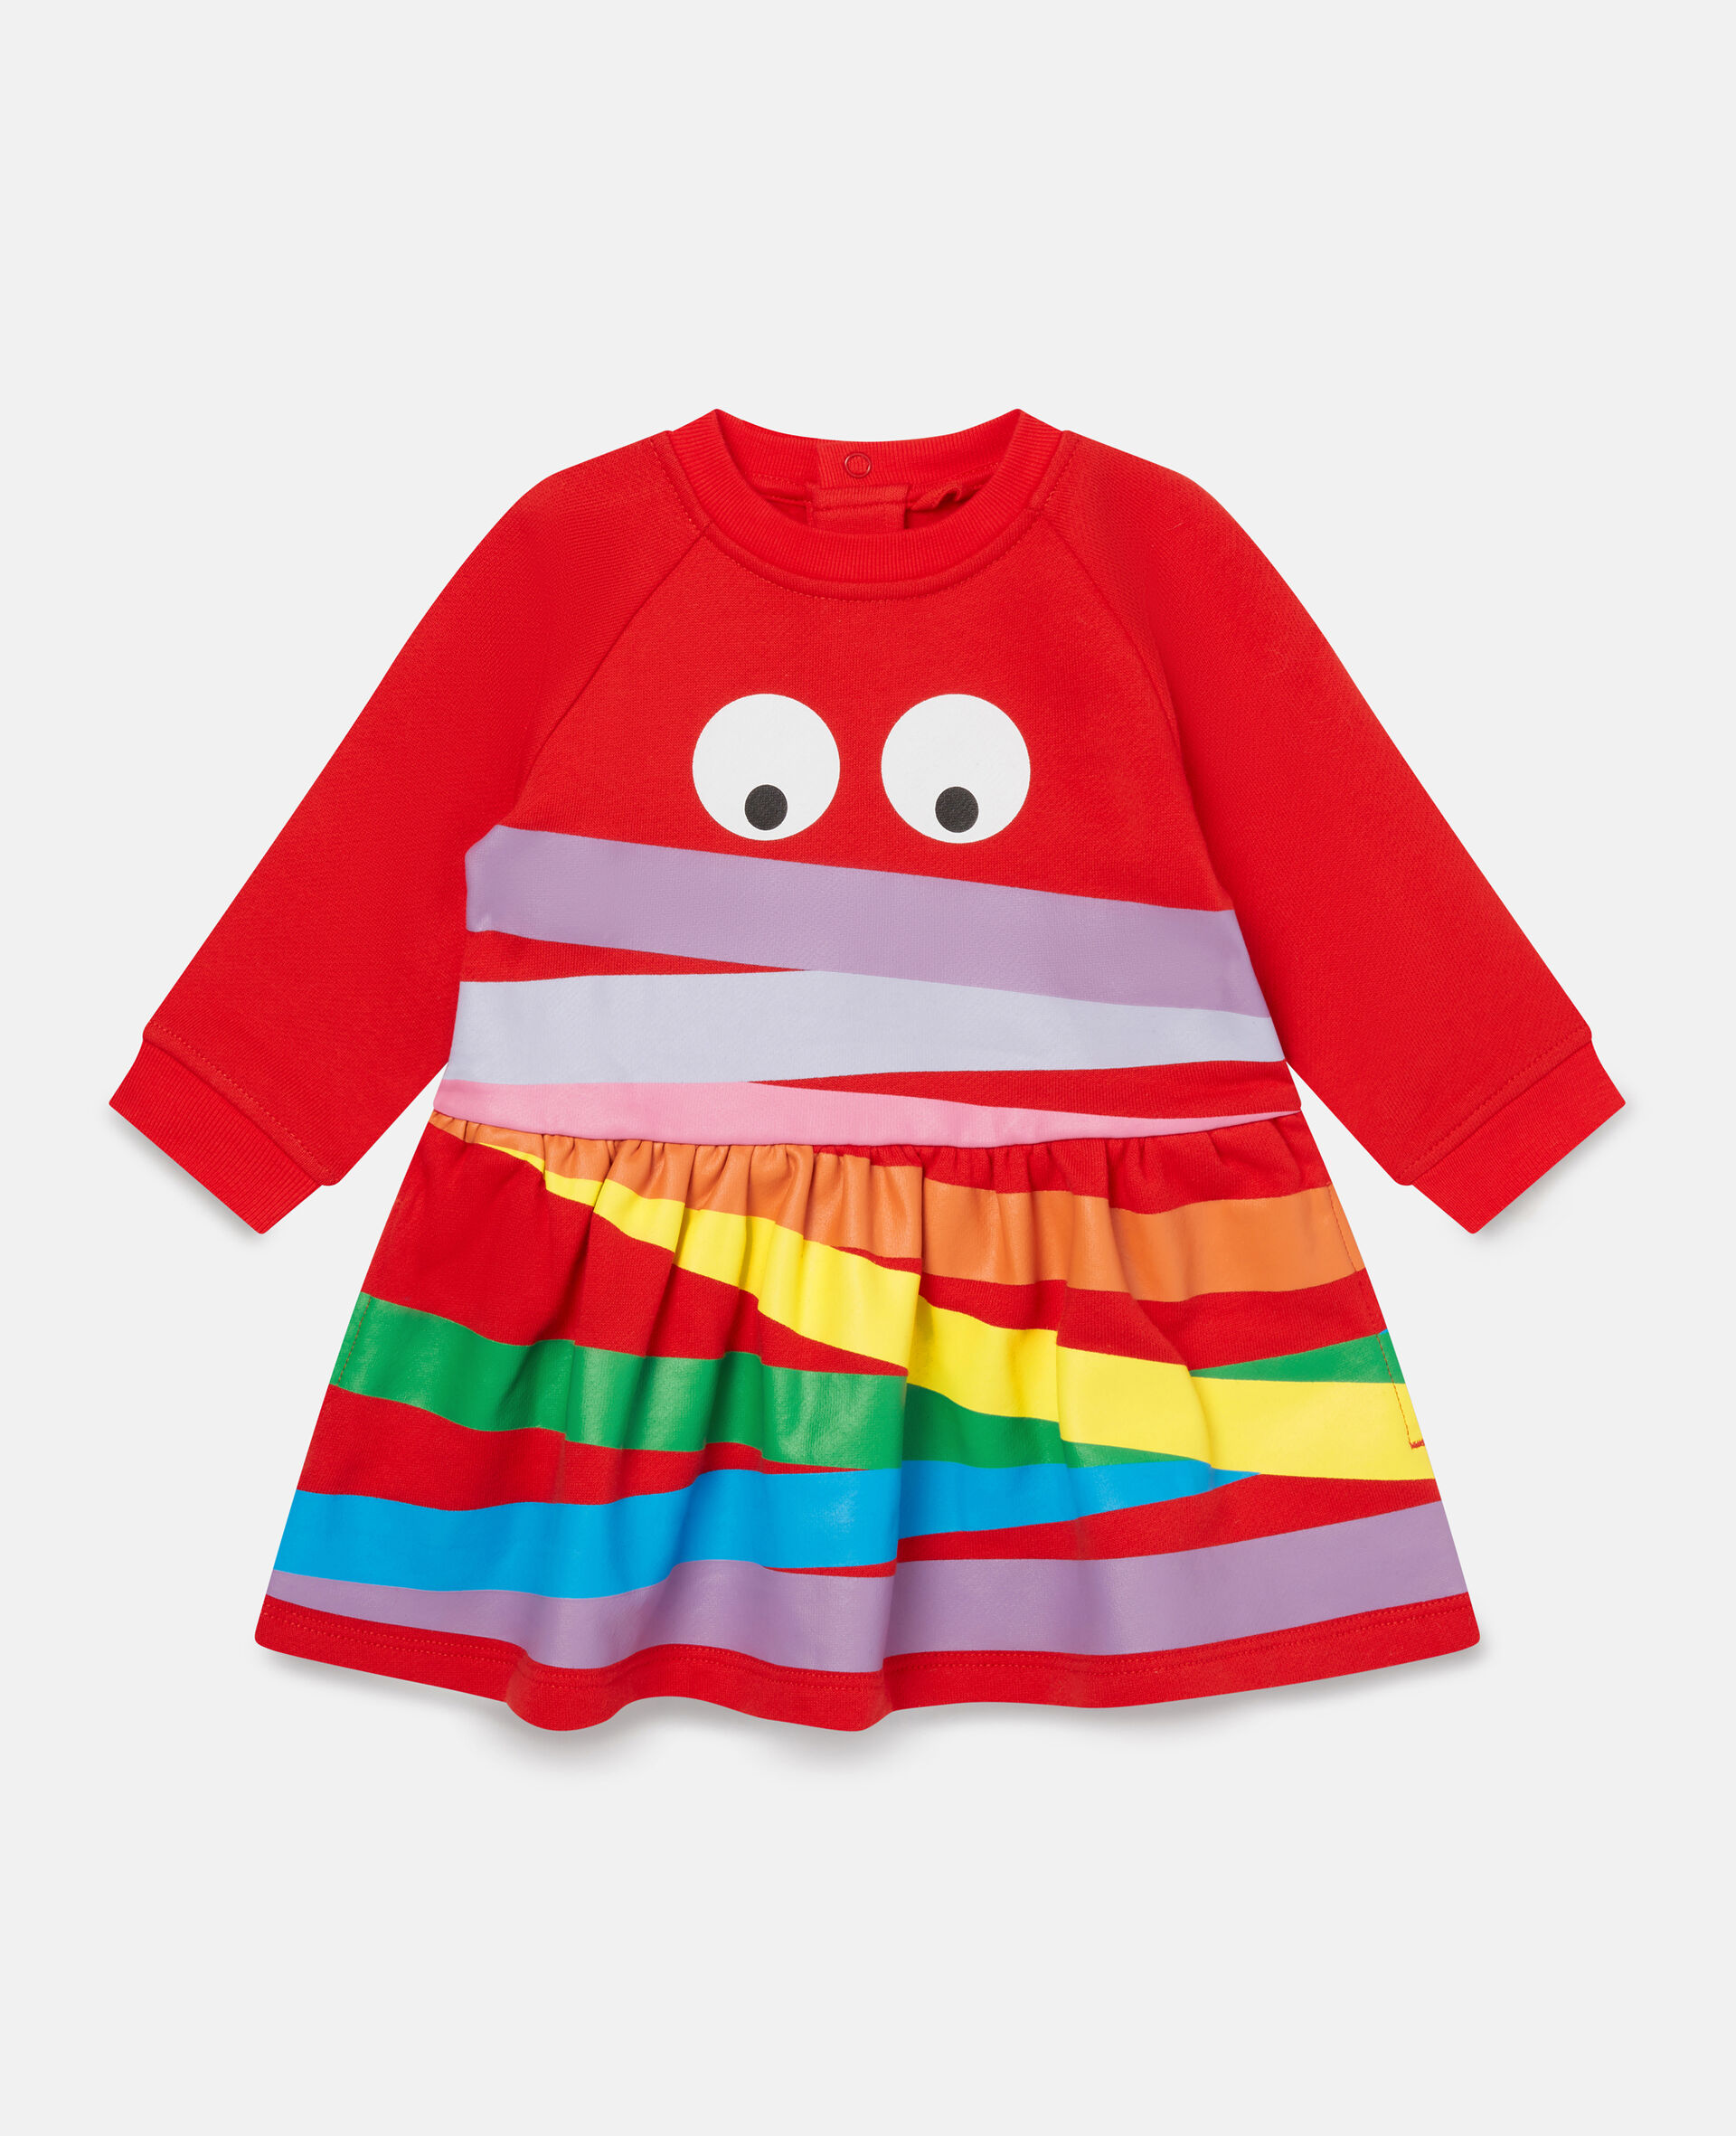 Cotton Fleece Rainbow Face Print Dress-Red-large image number 0